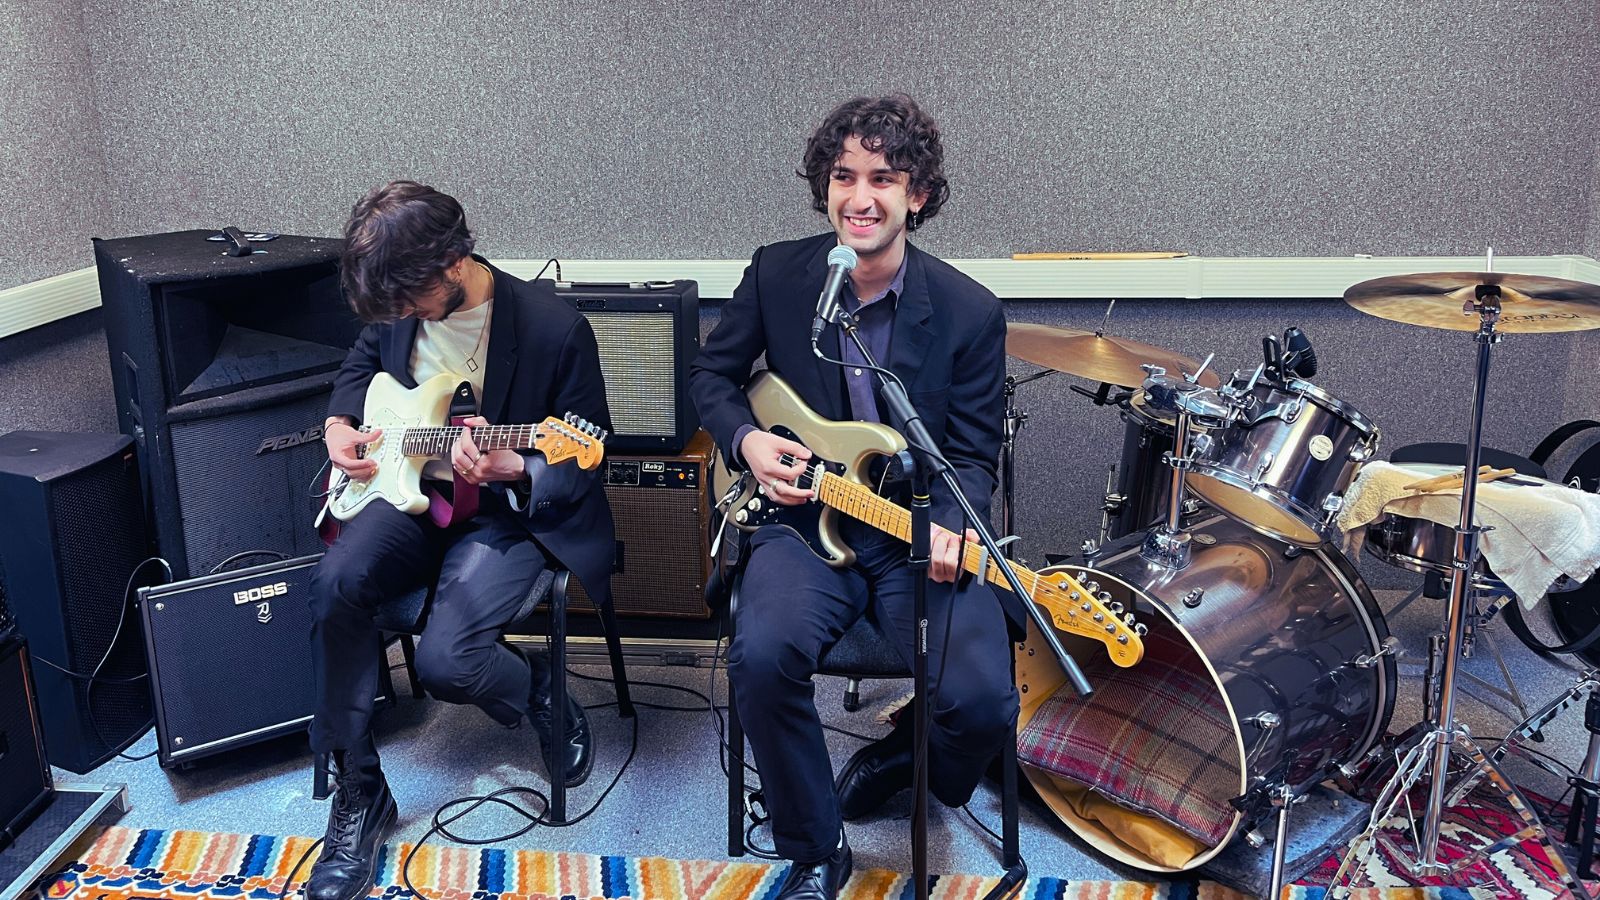 Photo of two young men with guitars sitting in a music studio space about to perform